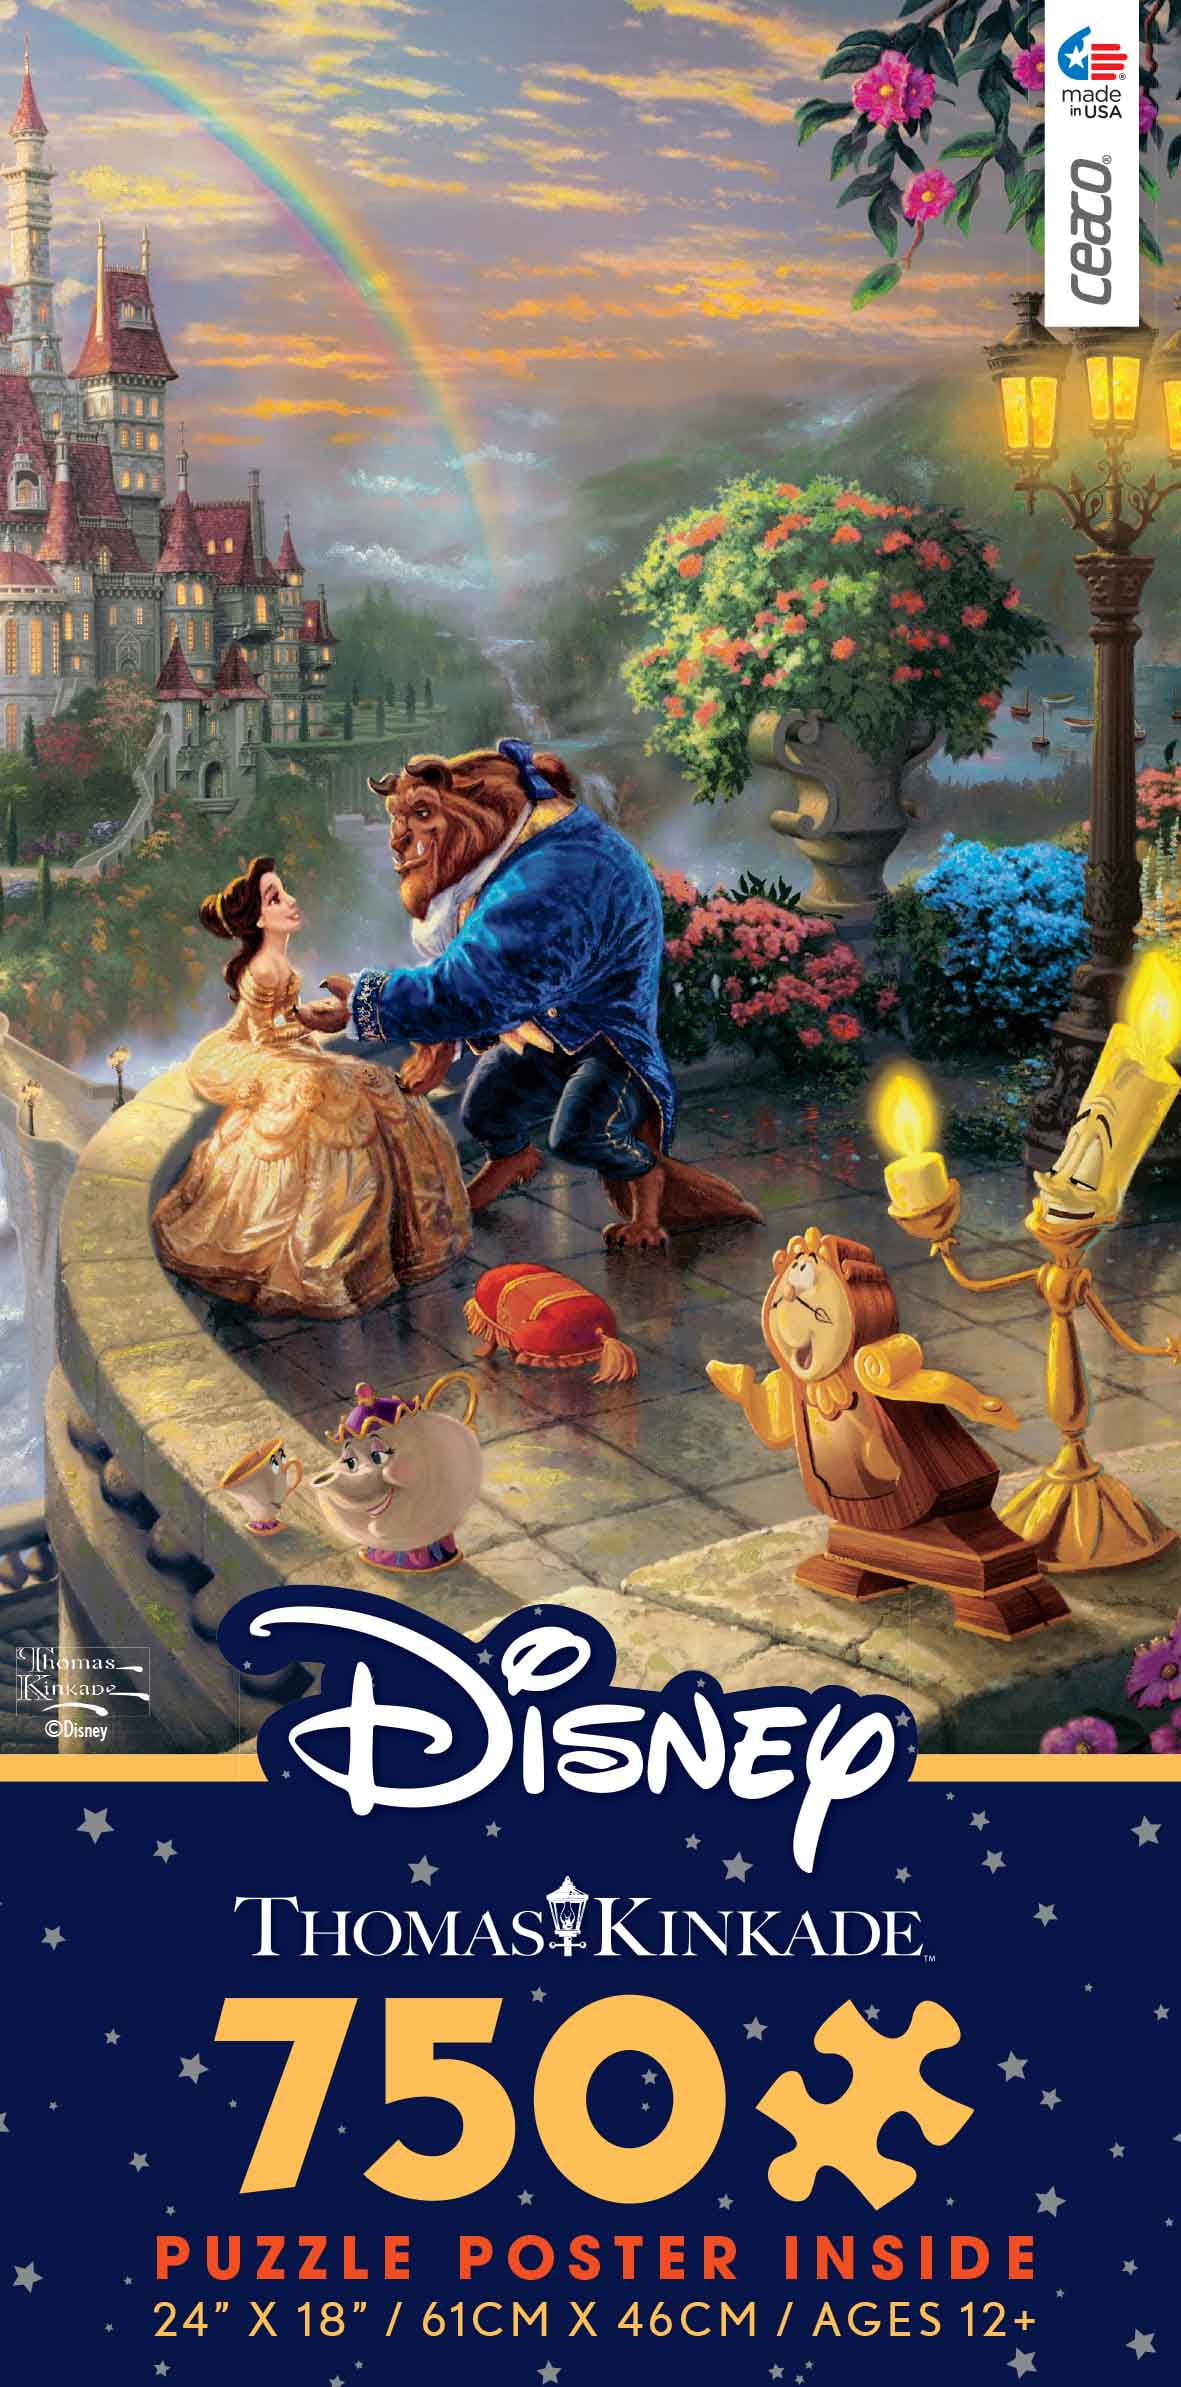 Thomas Kinkade Ceaco Beauty and The Beast Disney Collection Puzzle 750 Pcs 24x18 for sale online